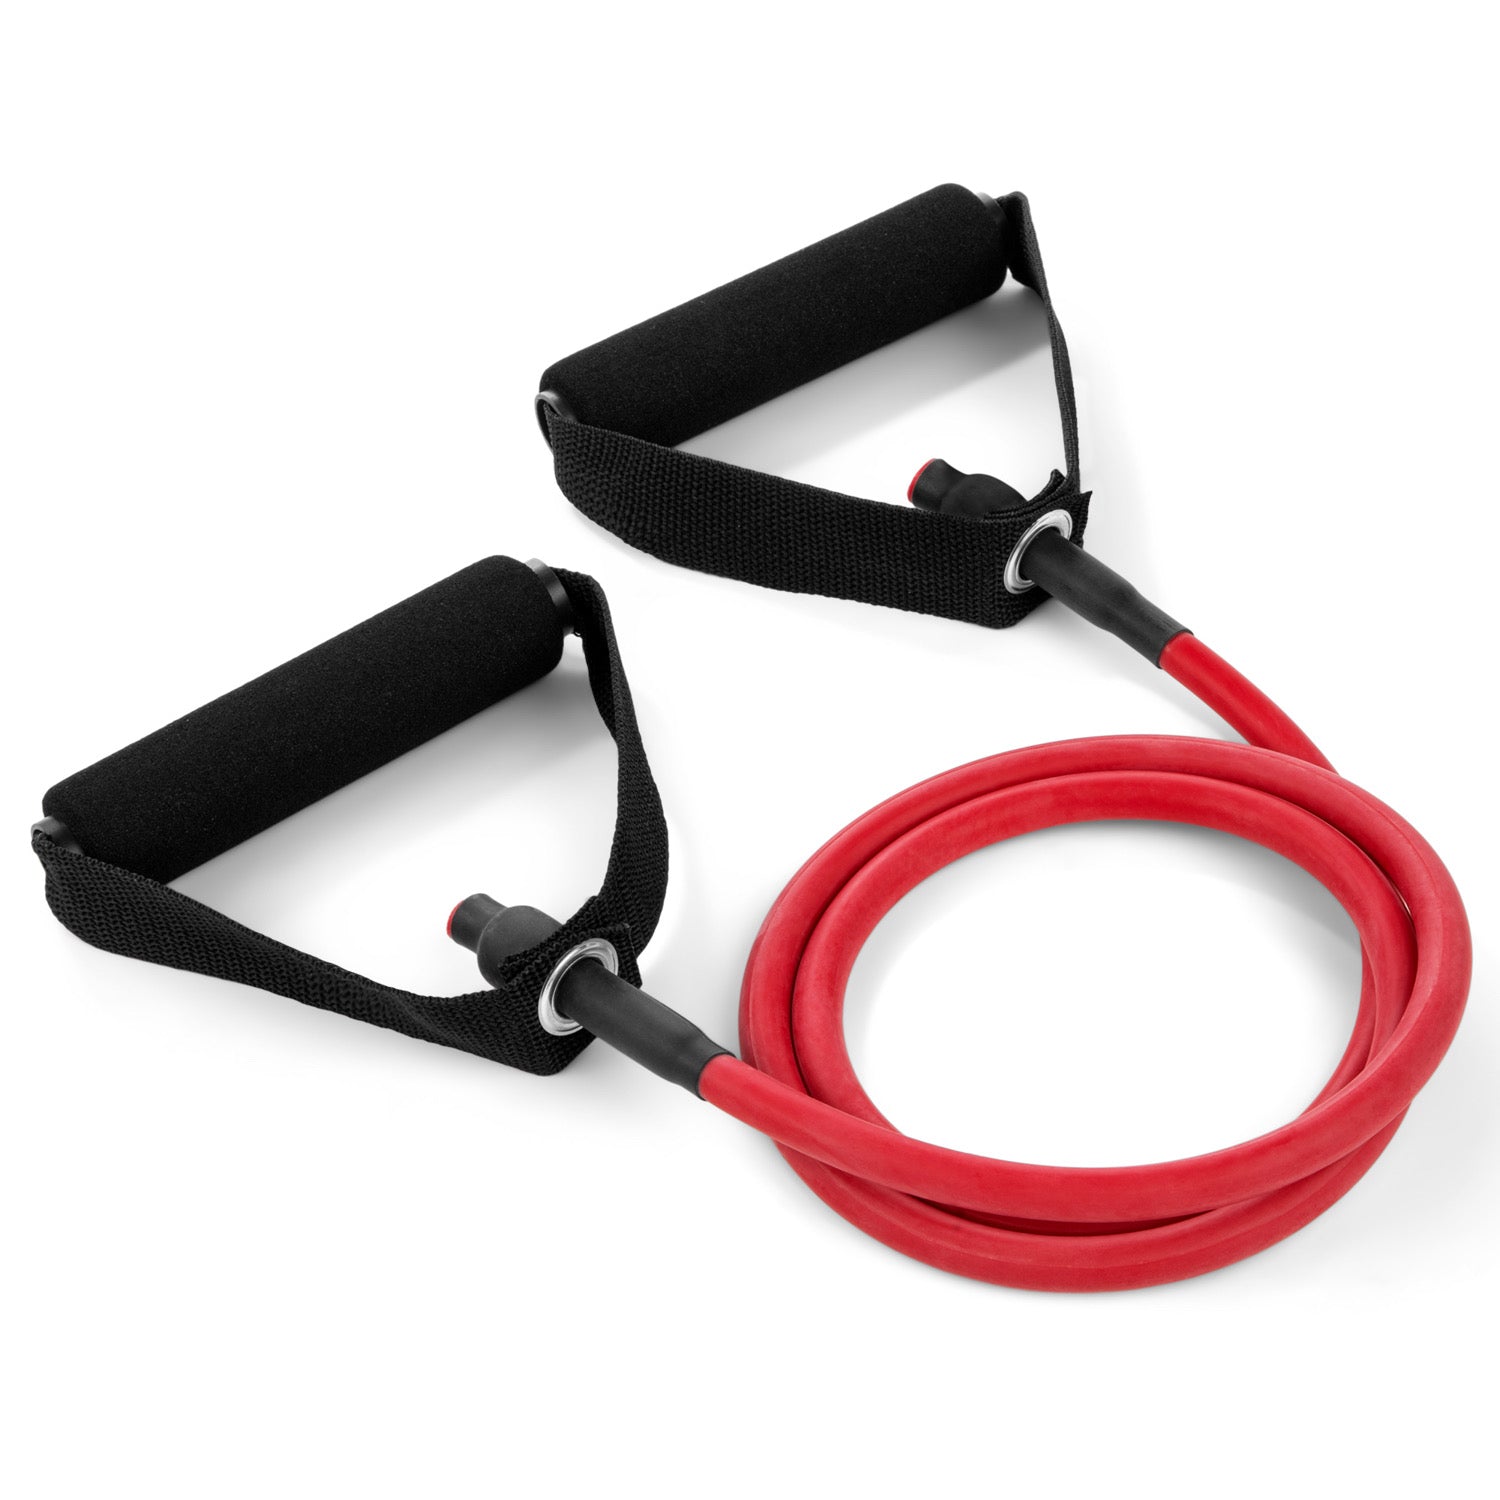 XF Resistance Tubing with Foam Handles Series Medium / Red RHINO Fitness __label:NEW! Fitness Physical Therapy Resistance Training Tubing